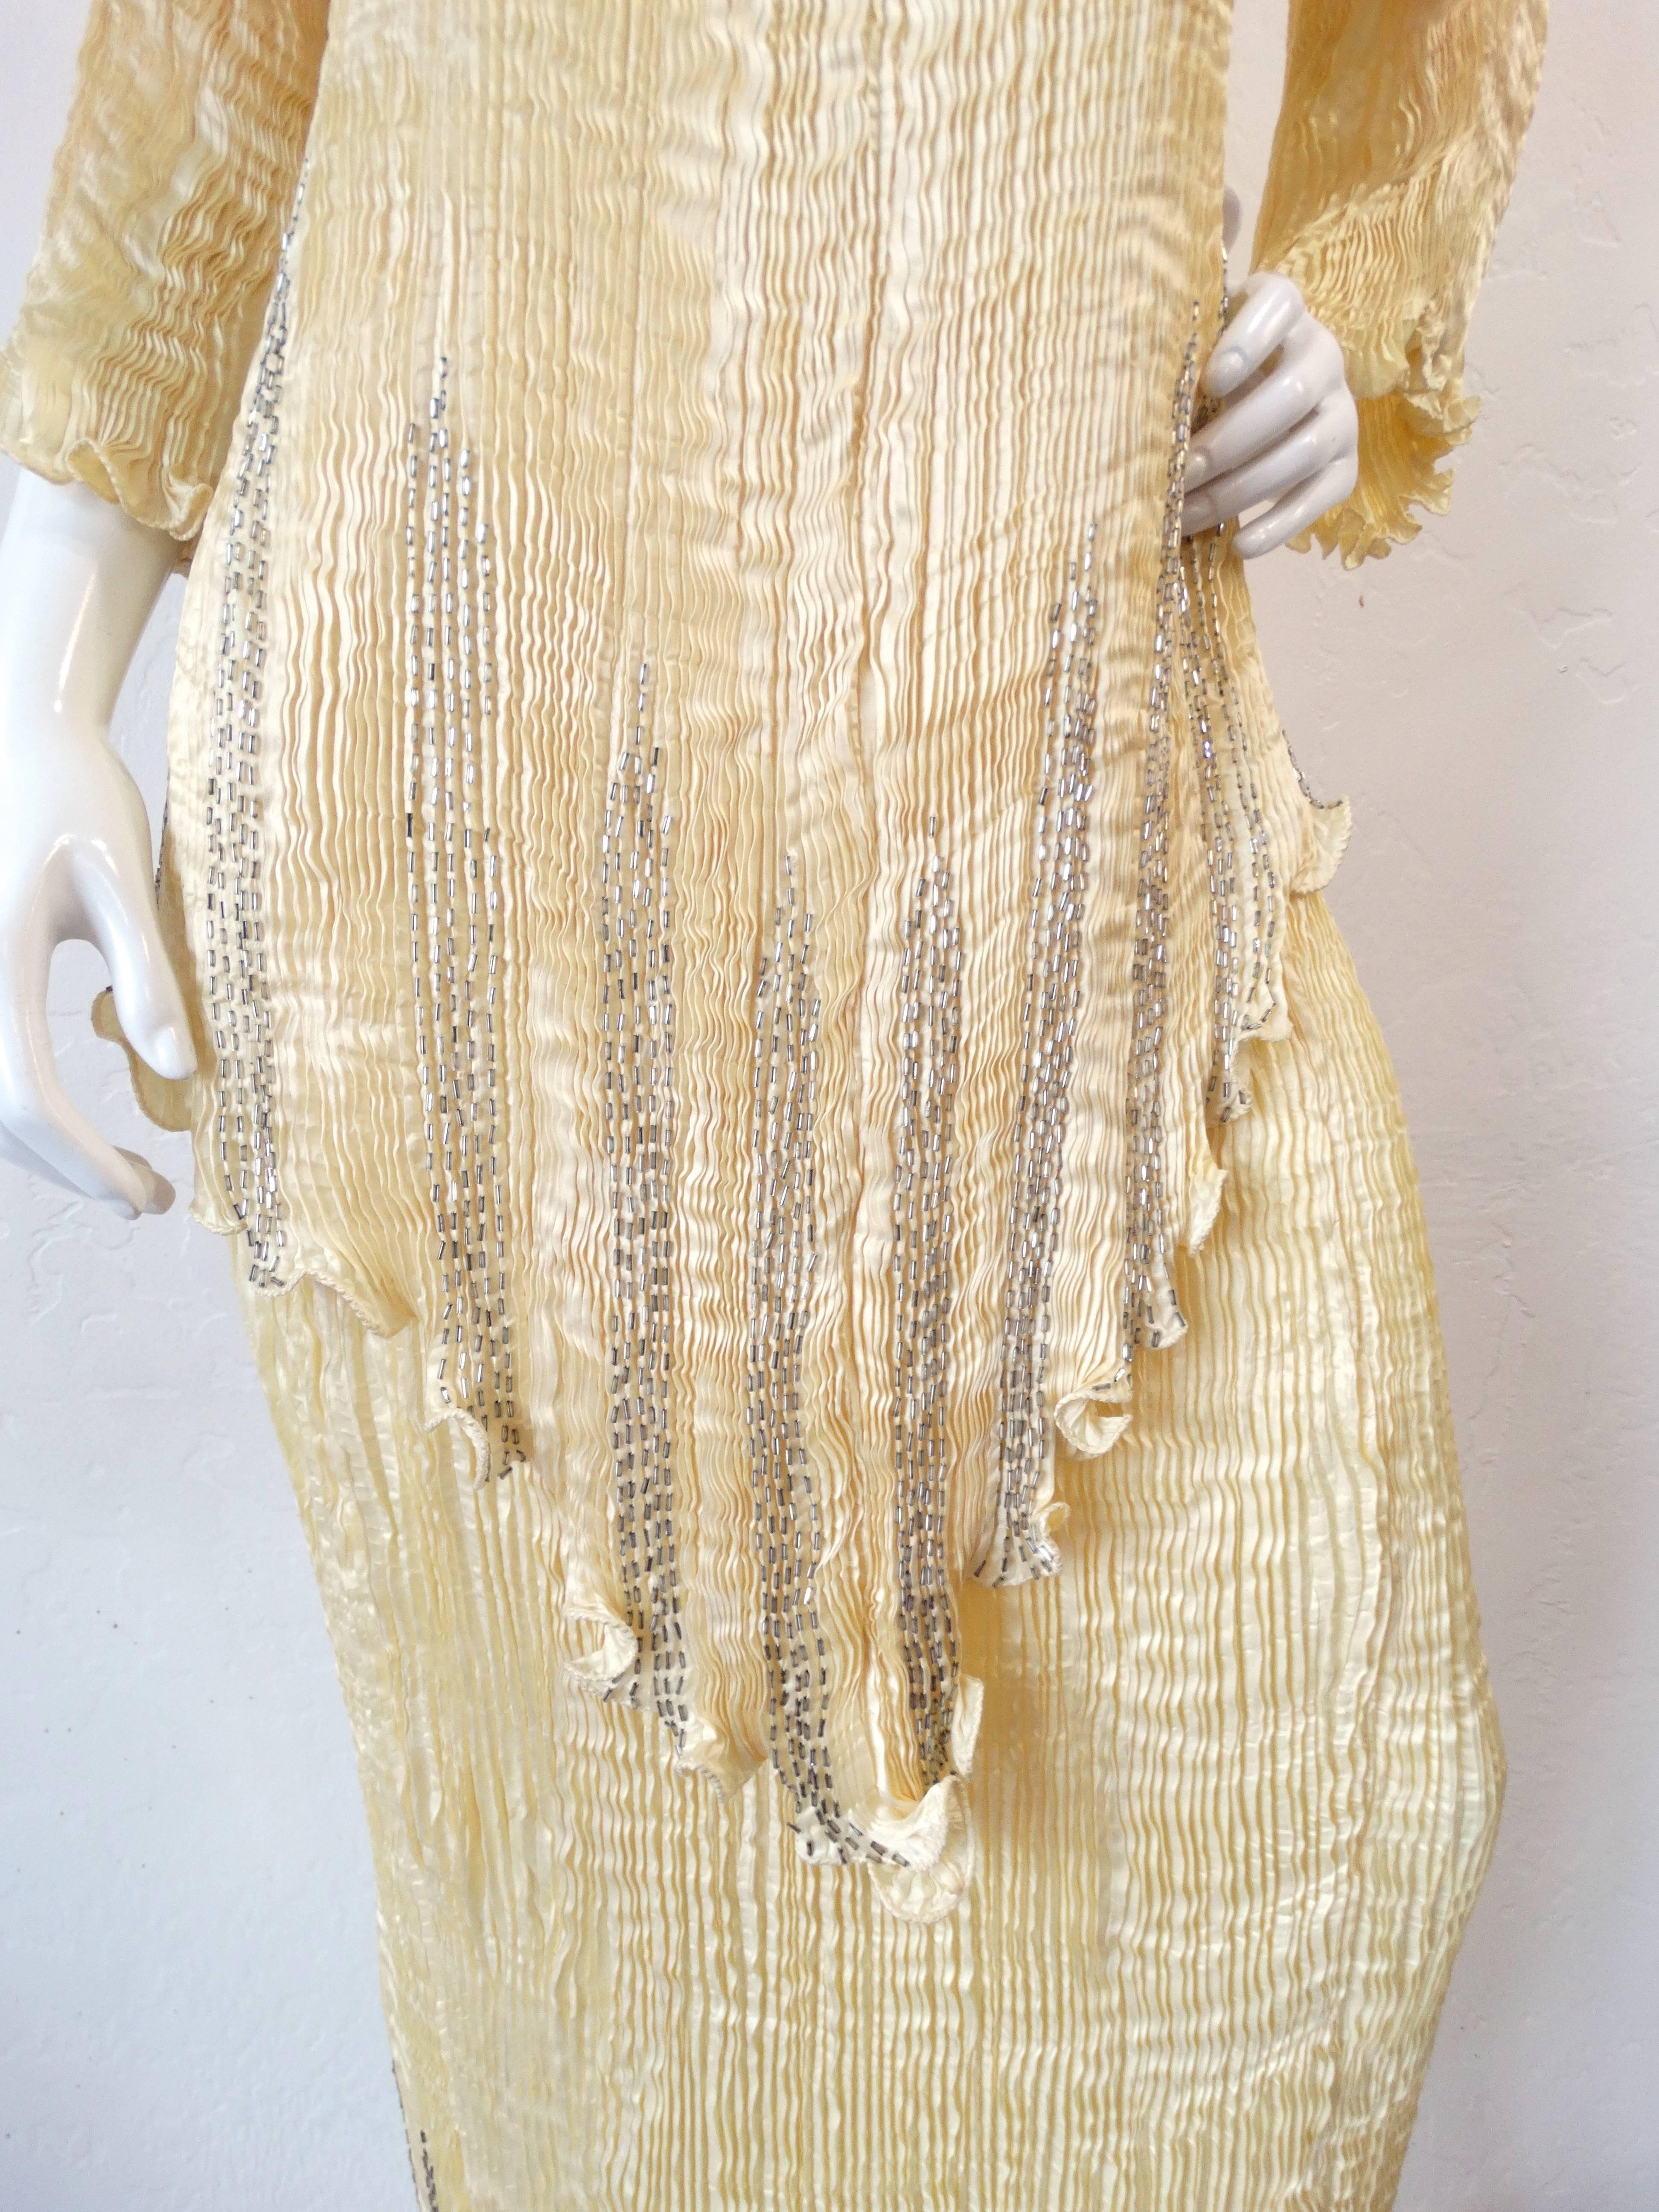 This set is a thing of beauty! From 1980s brand Capriccio in collaboration with Patricia Lester! Silky fortuny micro-pleated fabric in a lemony yellow color! Long top with a hanky-esque hem. Maxi length skirt with elasticized waist for an adjustable